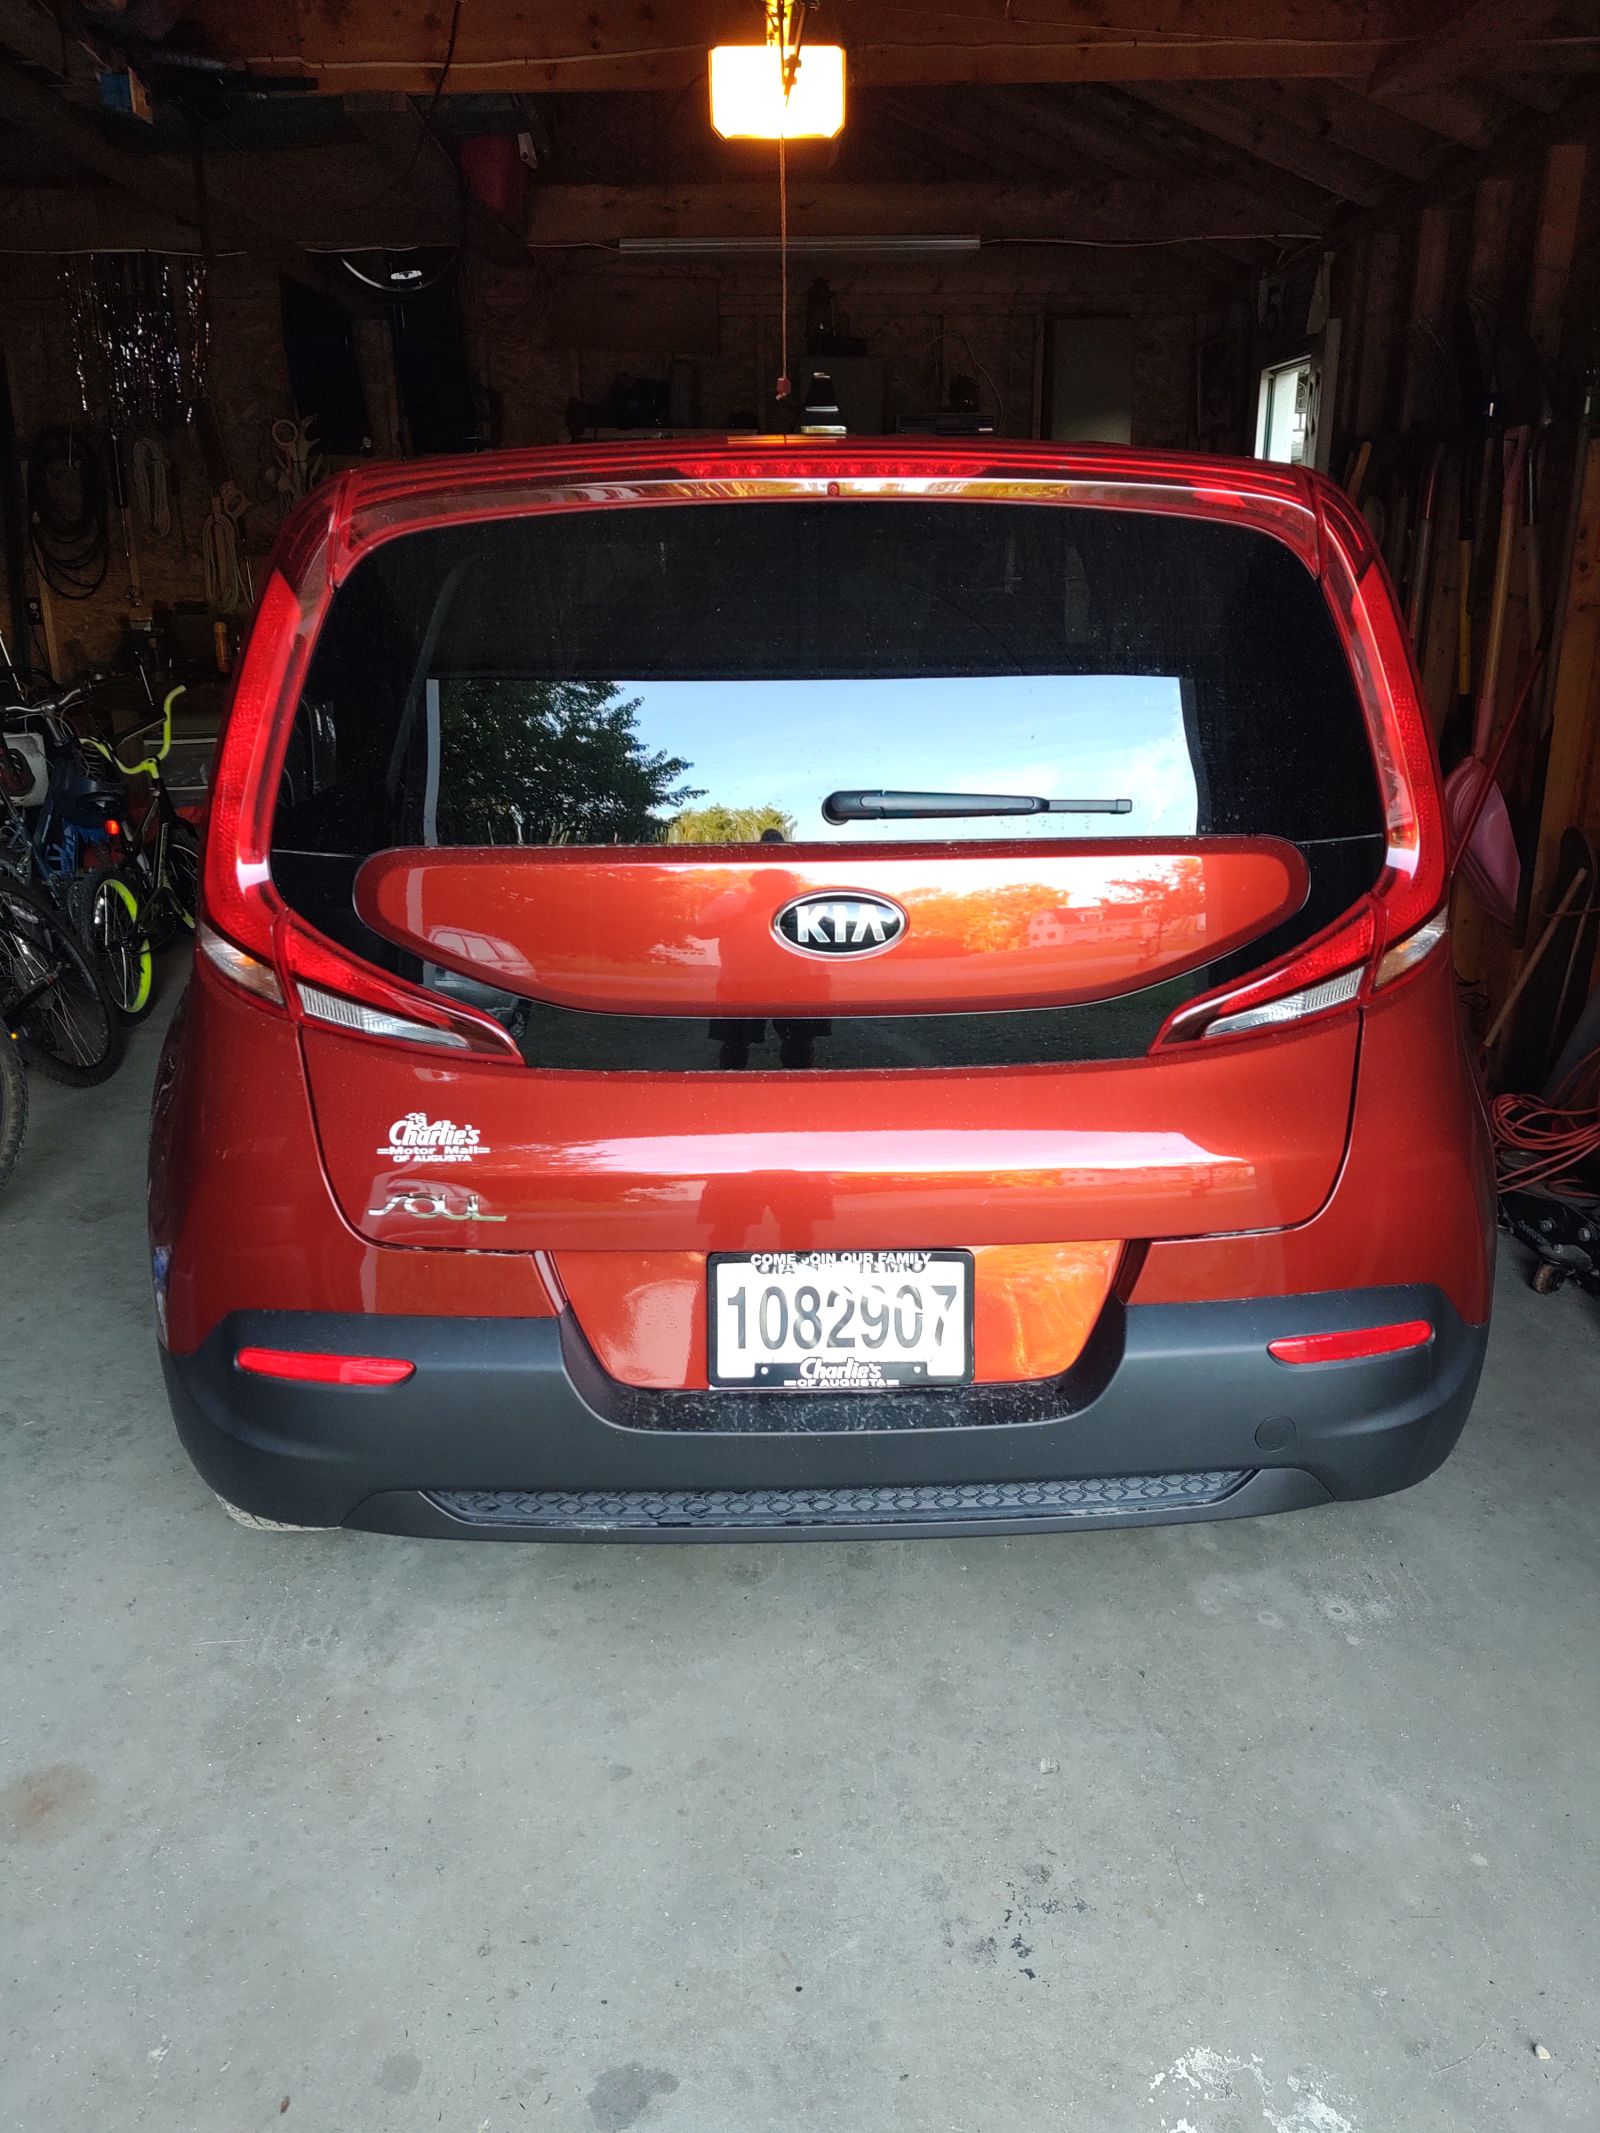 This weird brake light hoop made my wife not want this. It being cheaper than a 2019 and oh so smooth changed her mind